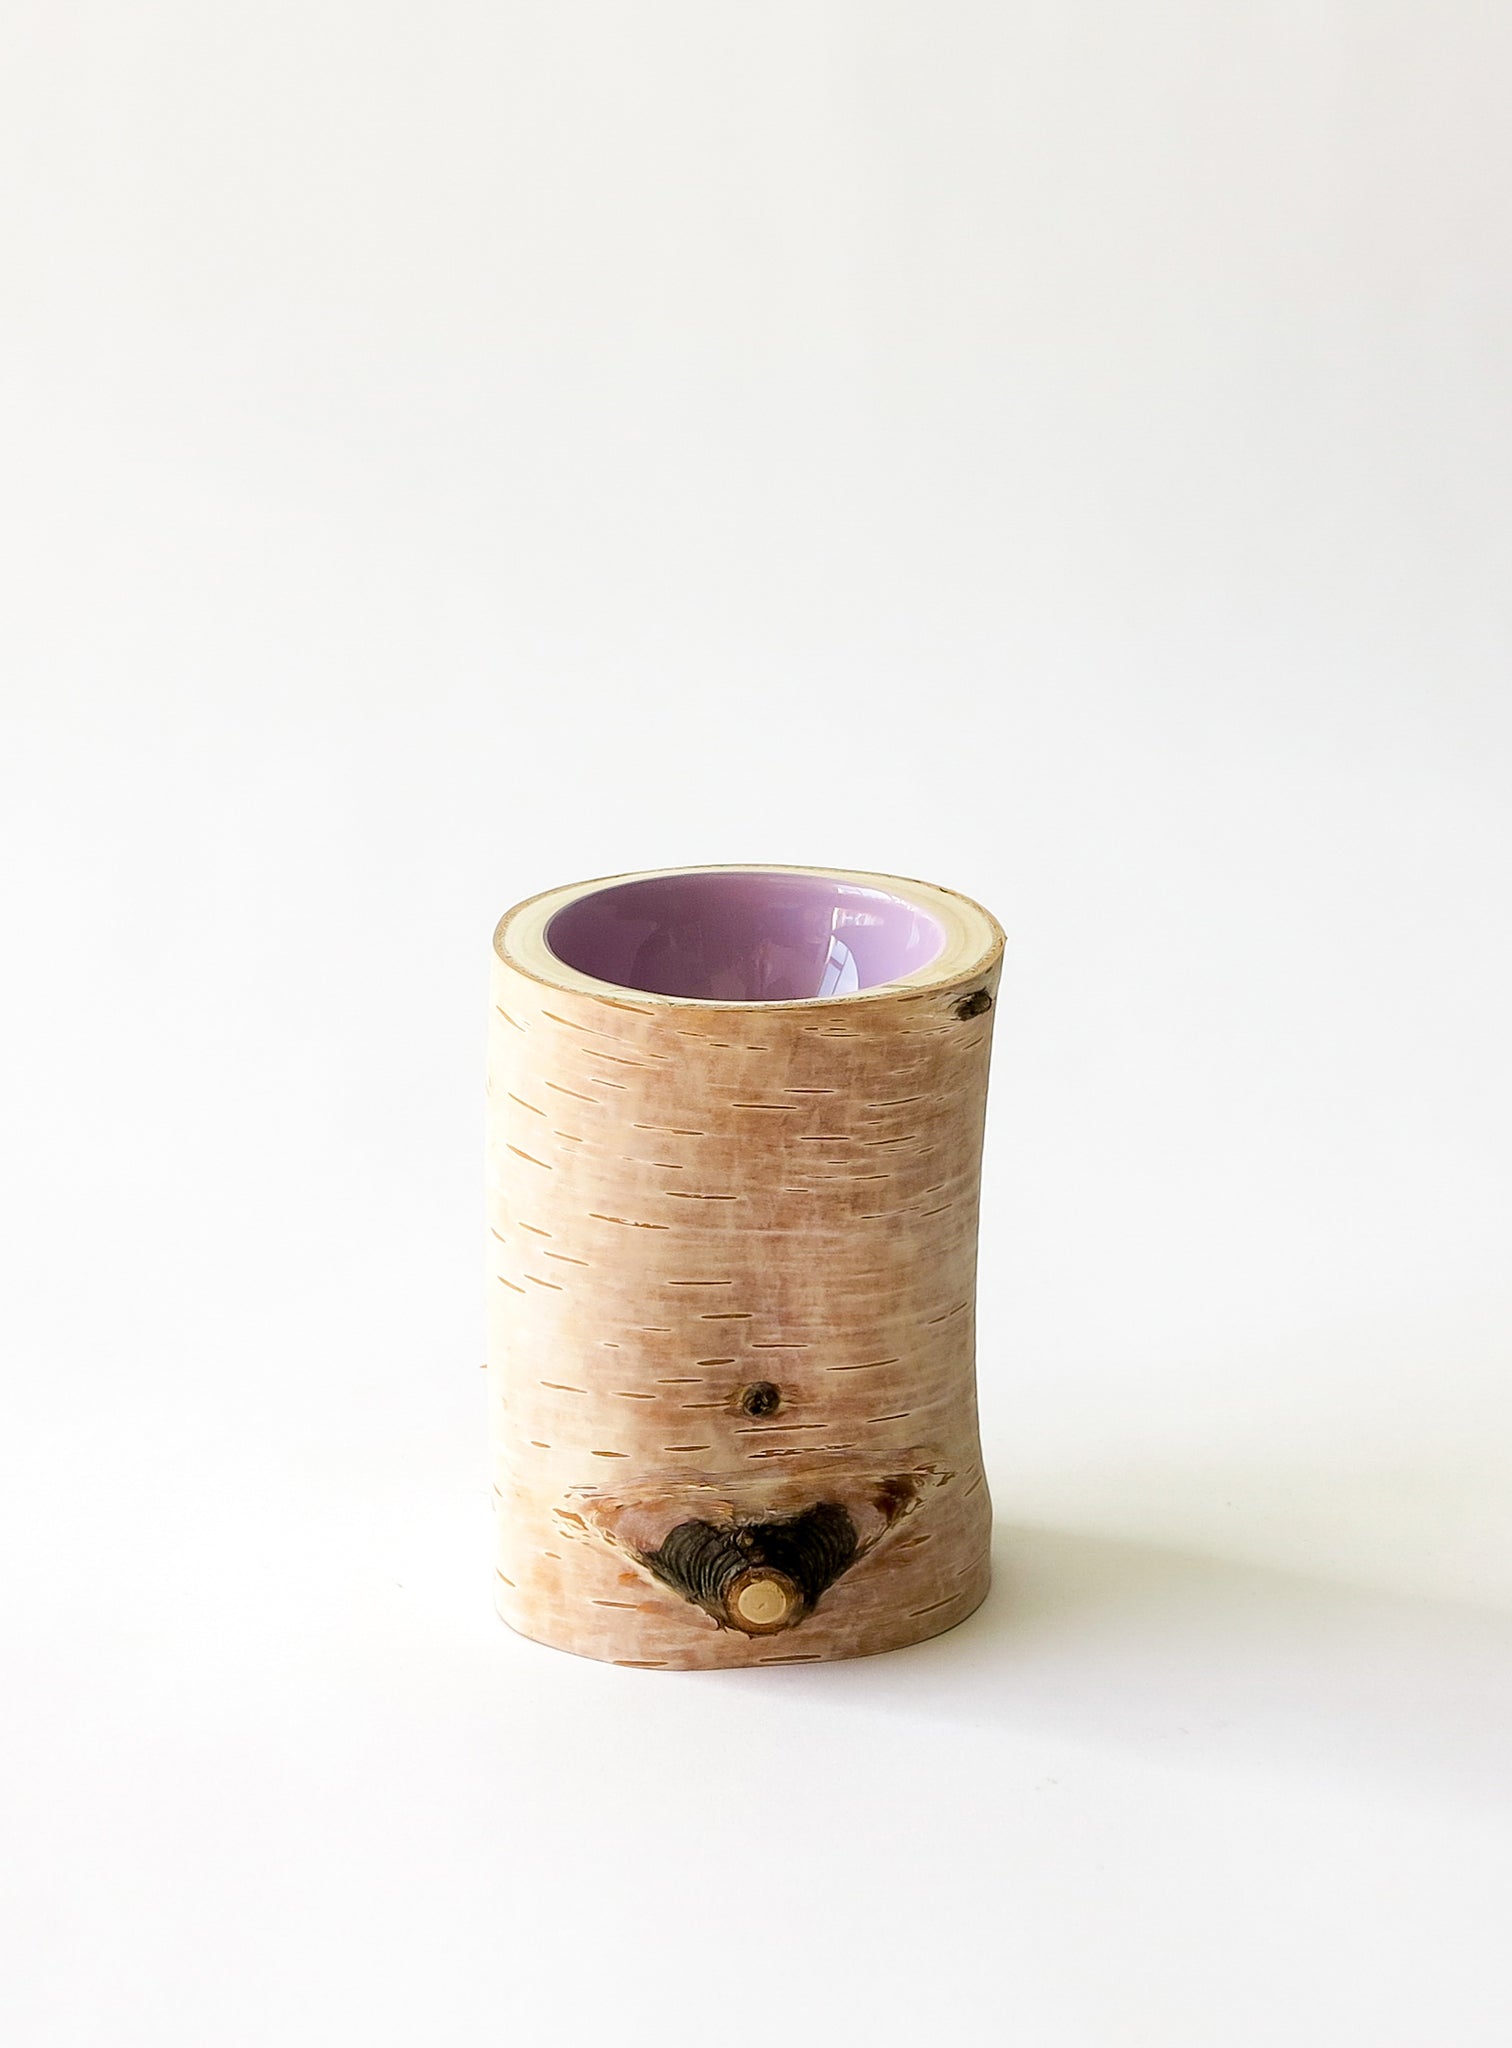 other side of Size 2 Log Bowl - extra small wooden bowl with papery birch bark, glossy interior is a light lilac purple colour.